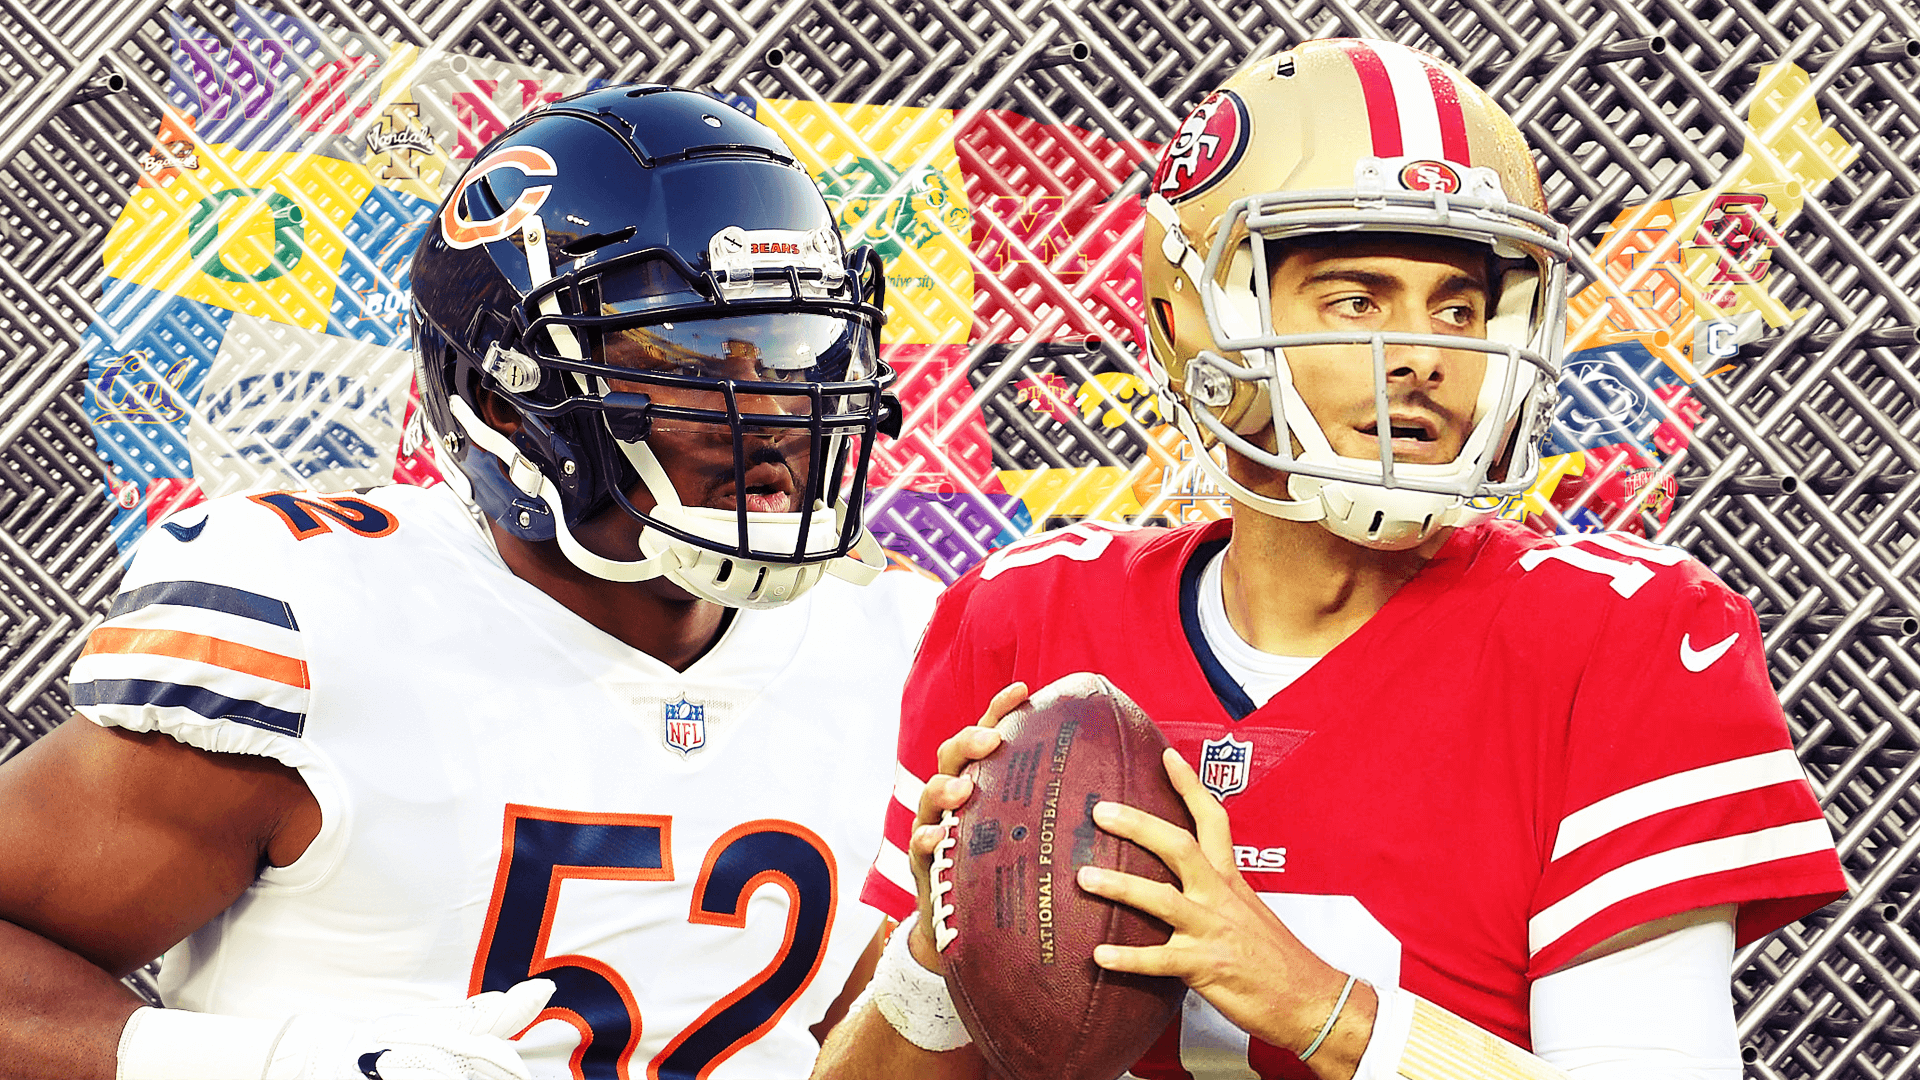 
		Khalil Mack, Jimmy Garoppolo, and more 2-star recruits who overcame adversity and made it to the NFL.